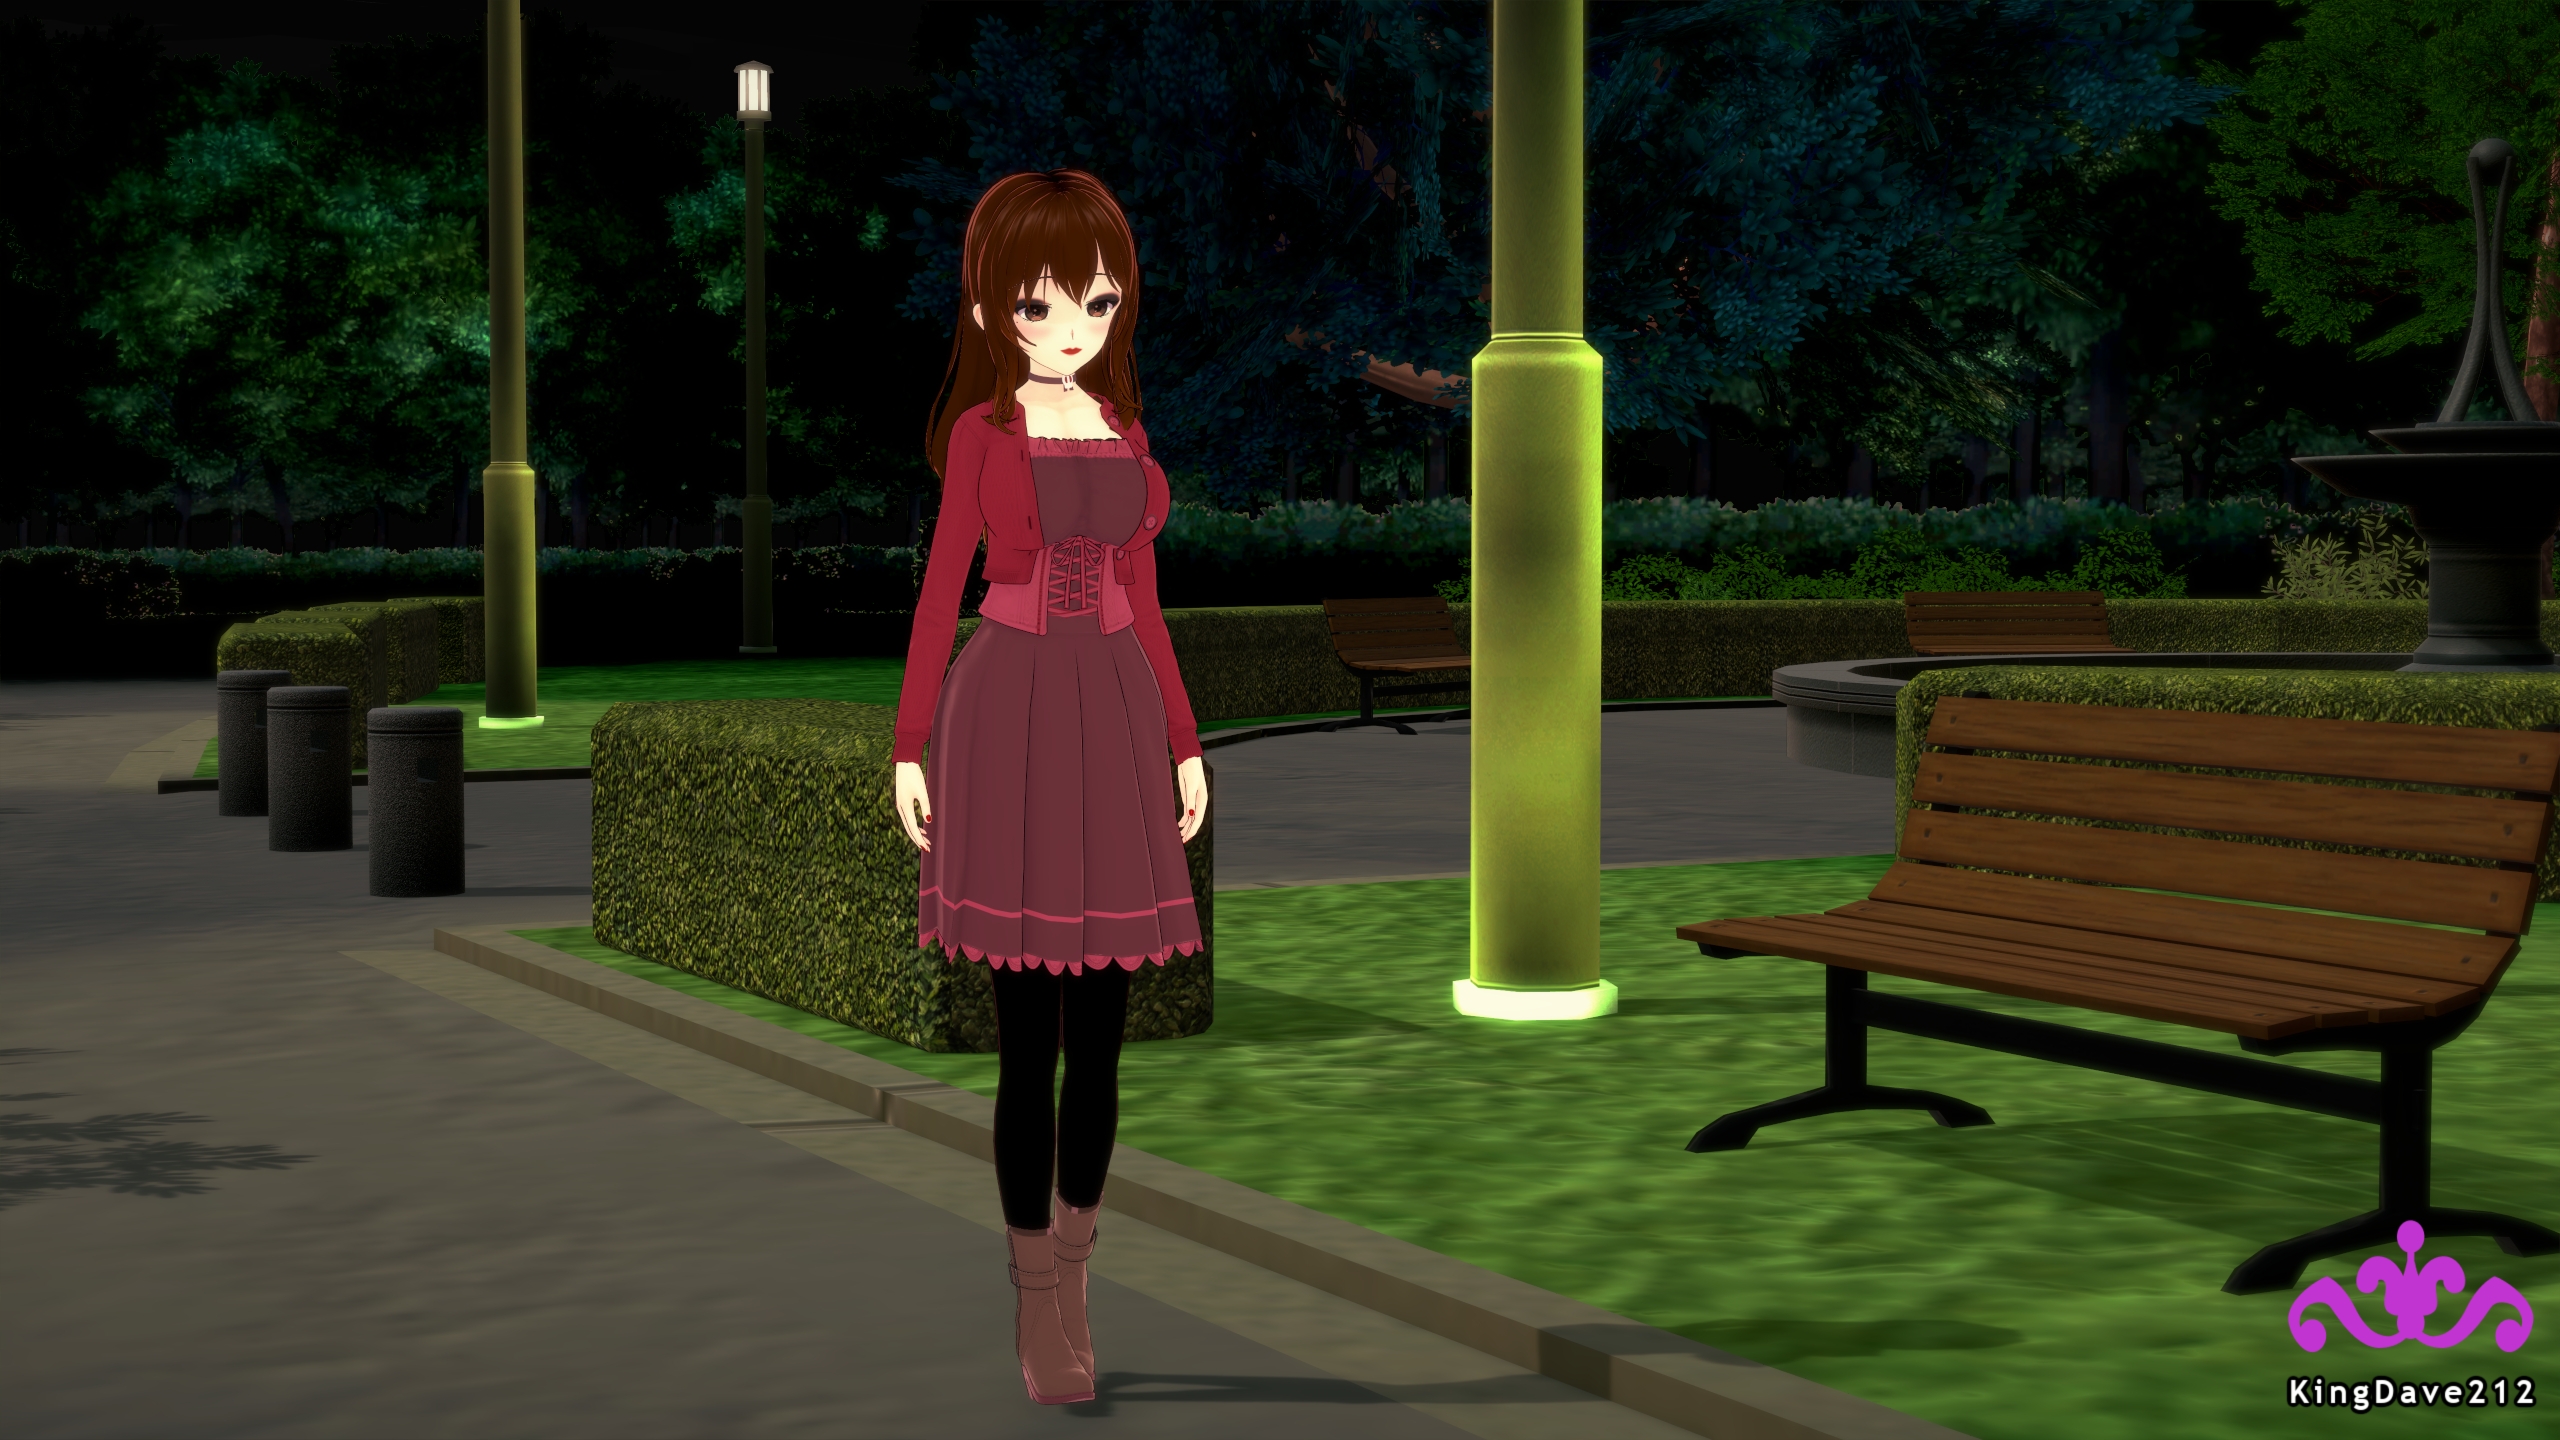 Kyouko in a park